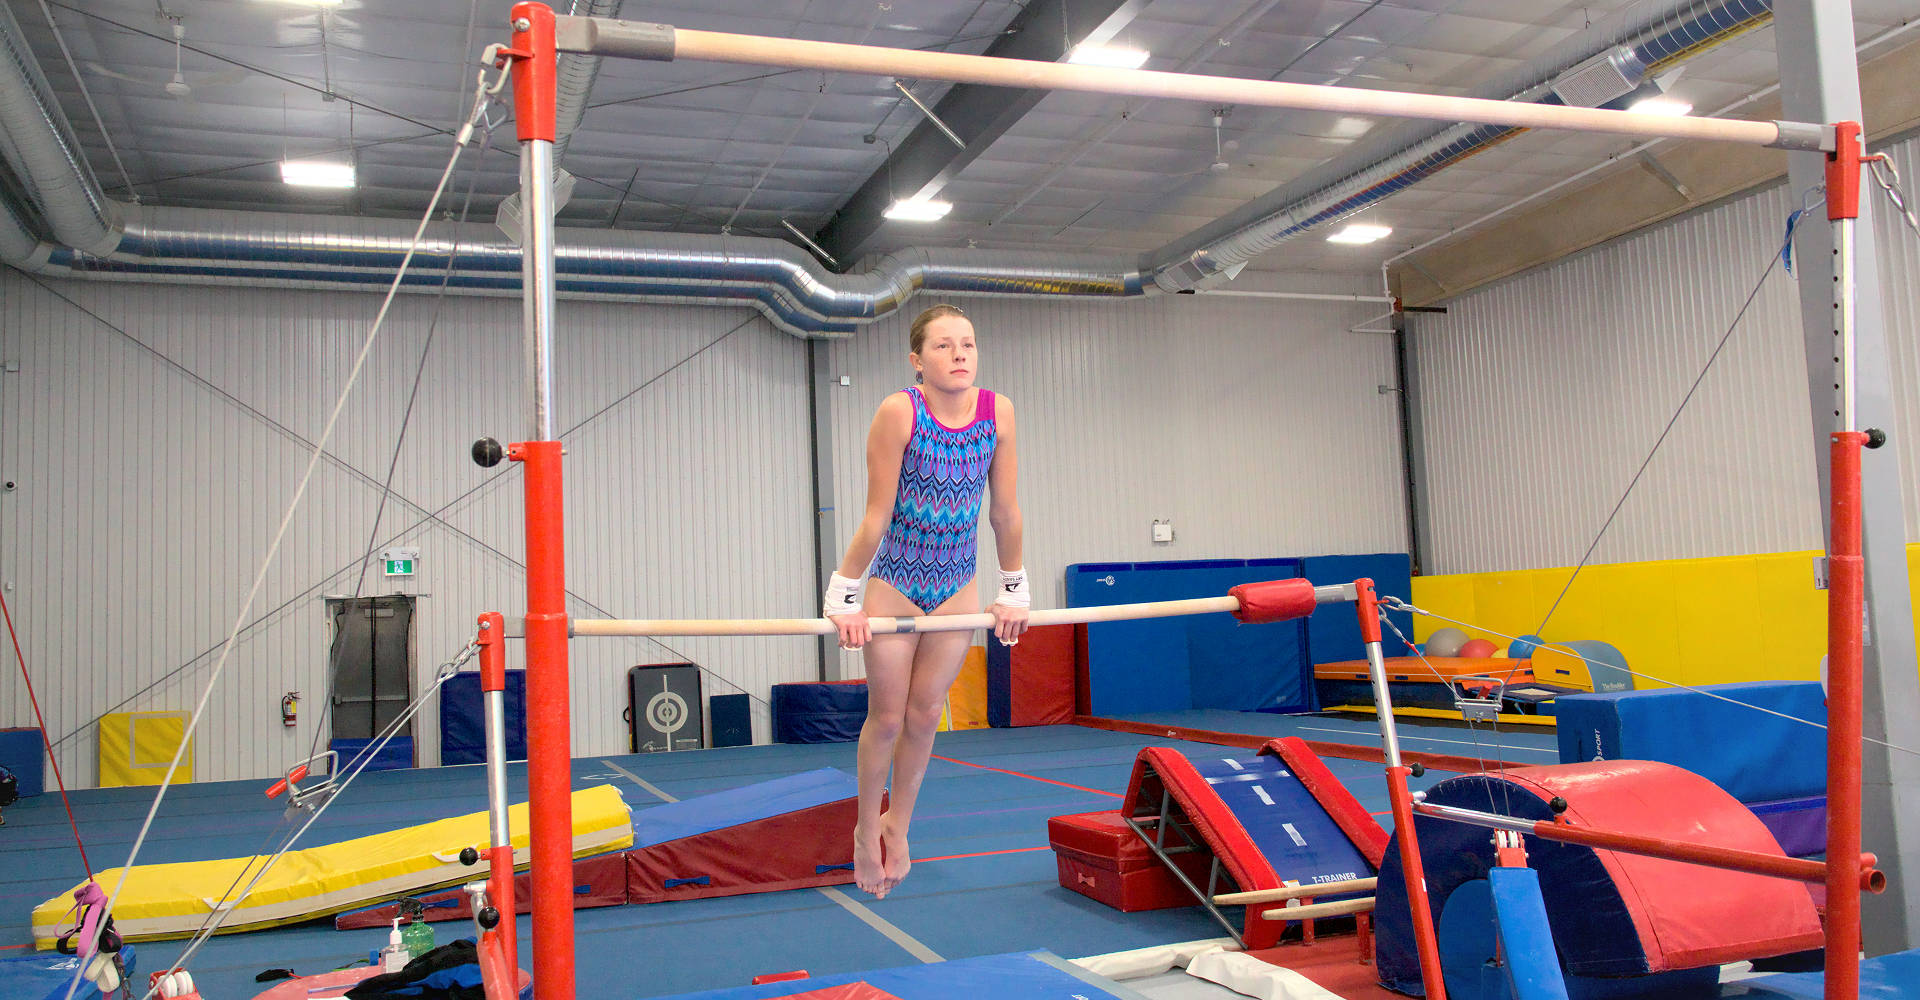 A young gymnast training on bars, holding front support, at the Gymworld Adventures in Gymnastics facility in London Ontario.